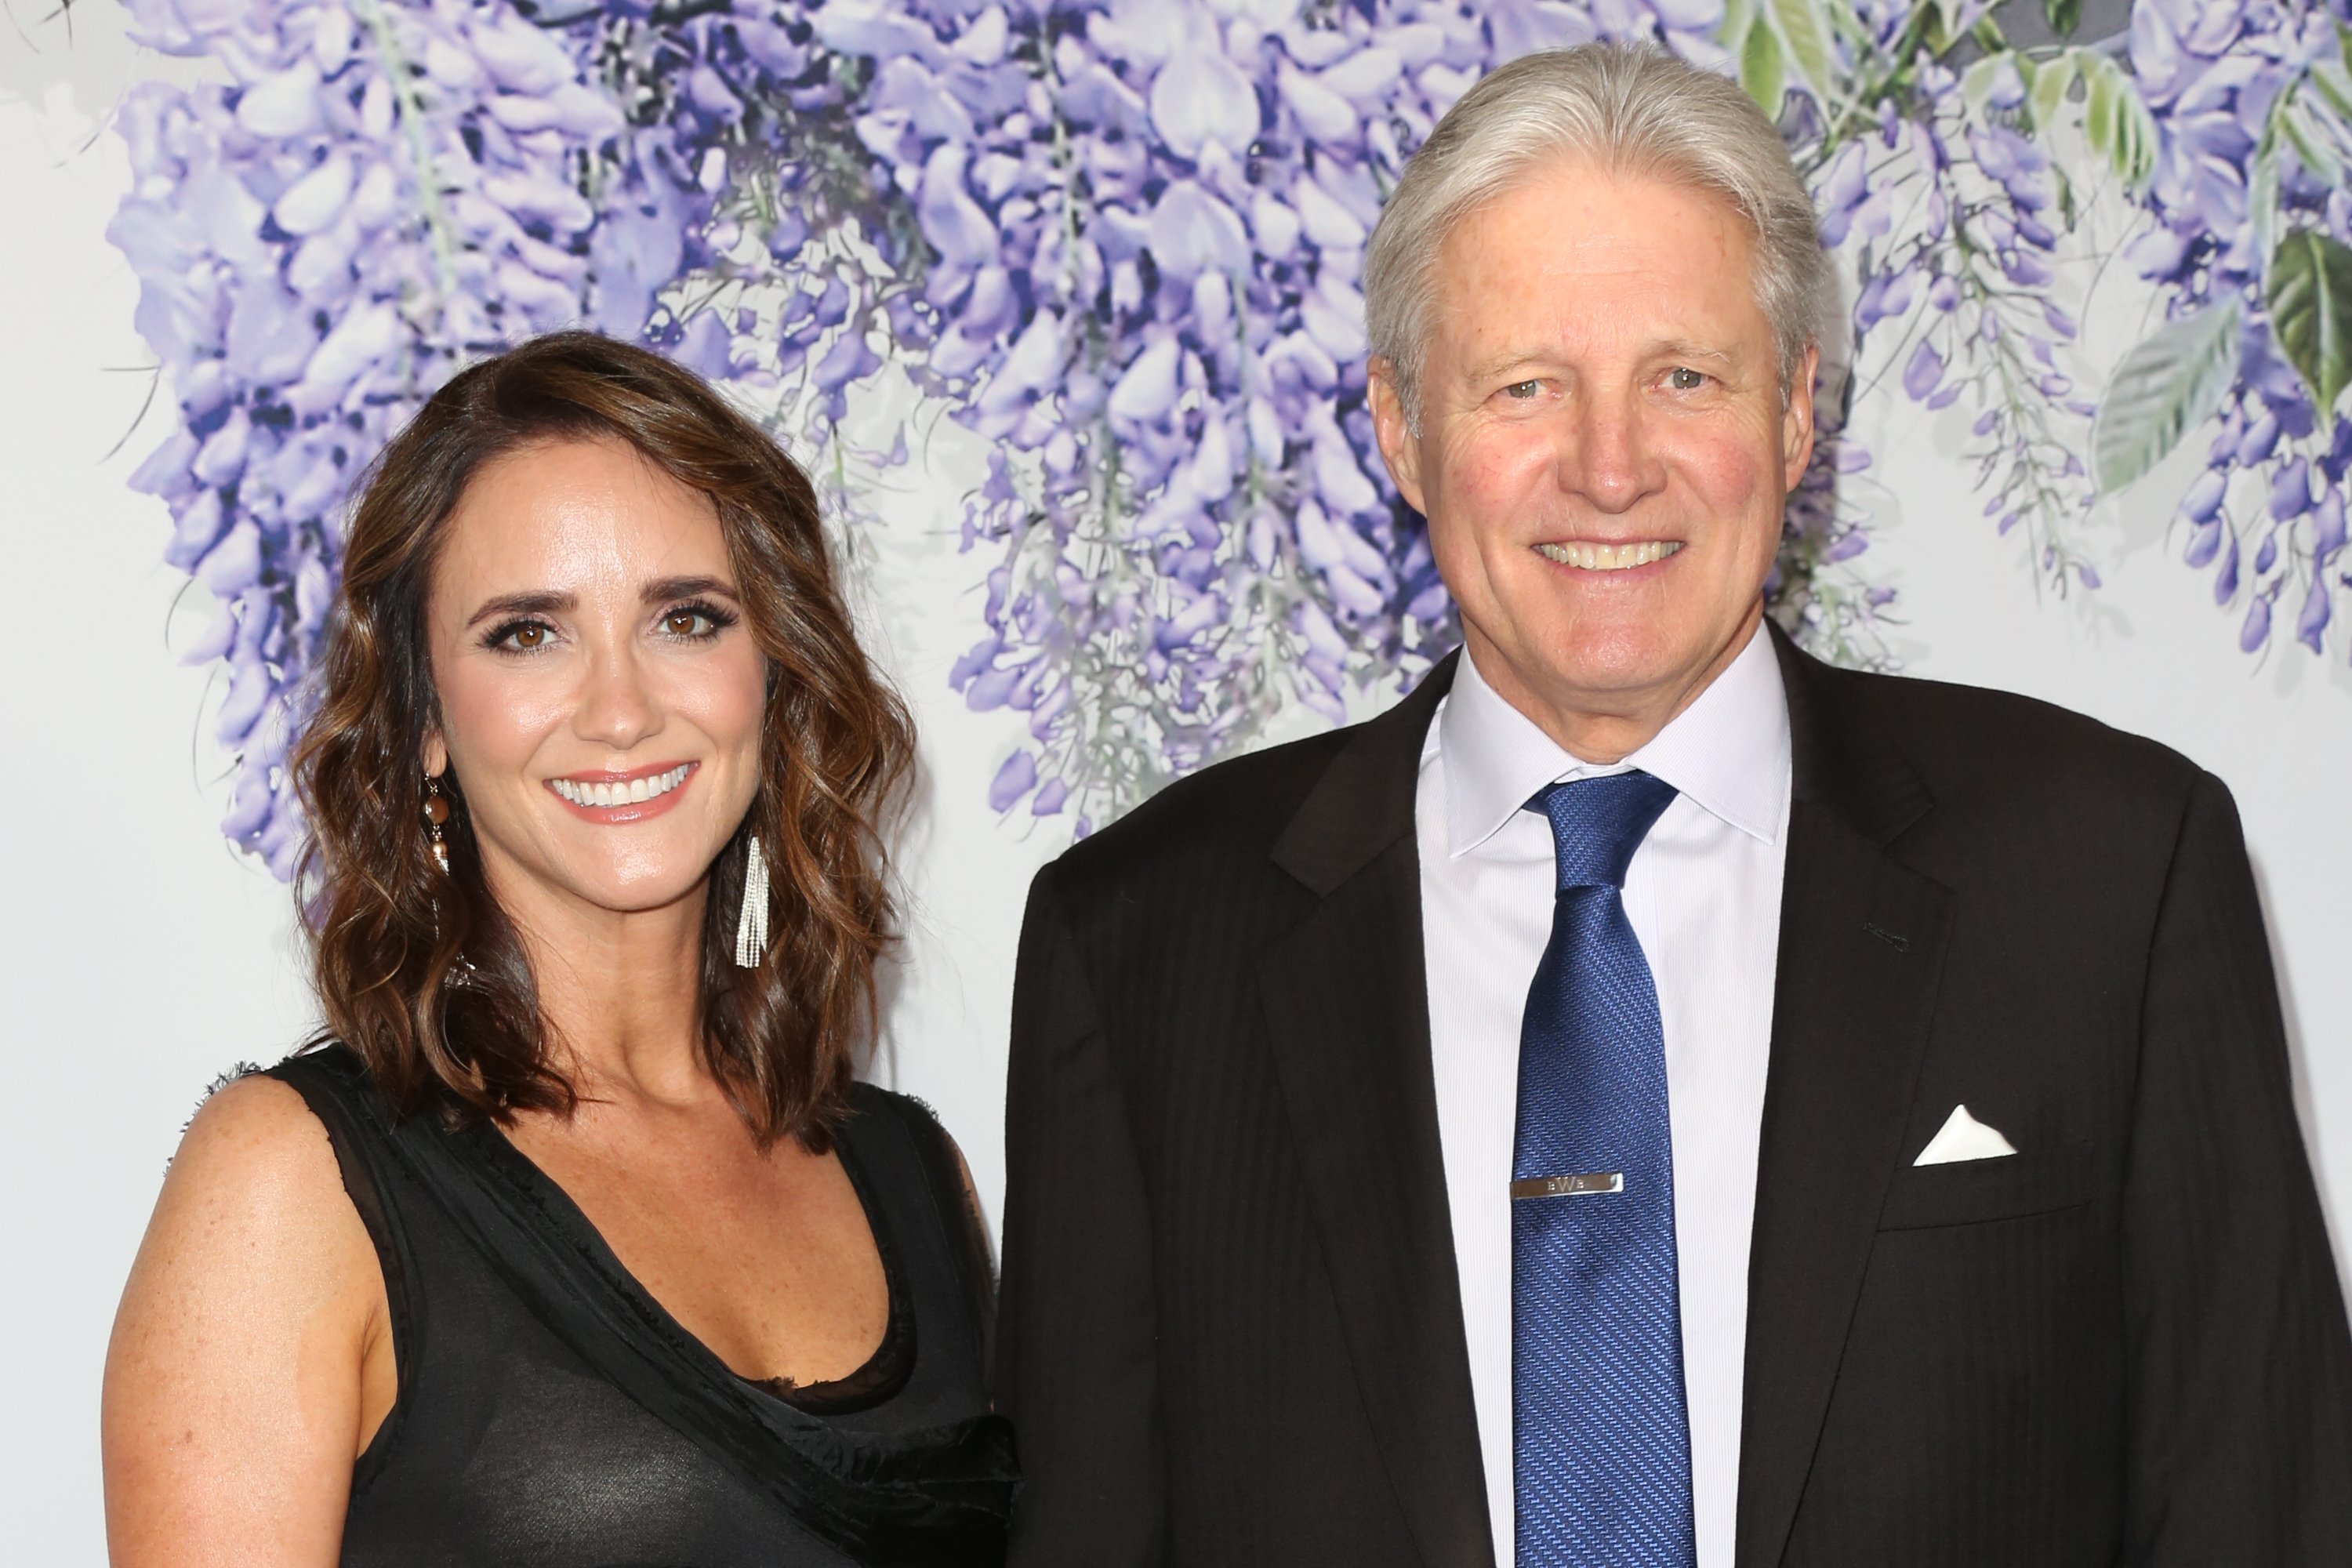 Bruce Boxleitner and his wife, Verena King-Boxleitner, attending an event together,